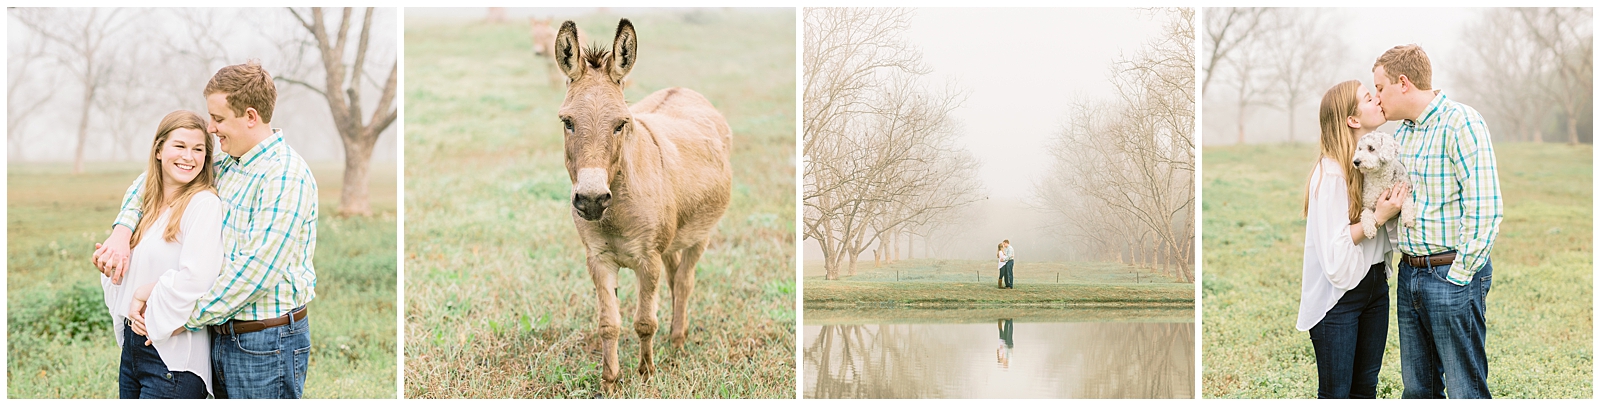 Mobile Alabama Photographer Engagement Session with gogs, goats, and fog